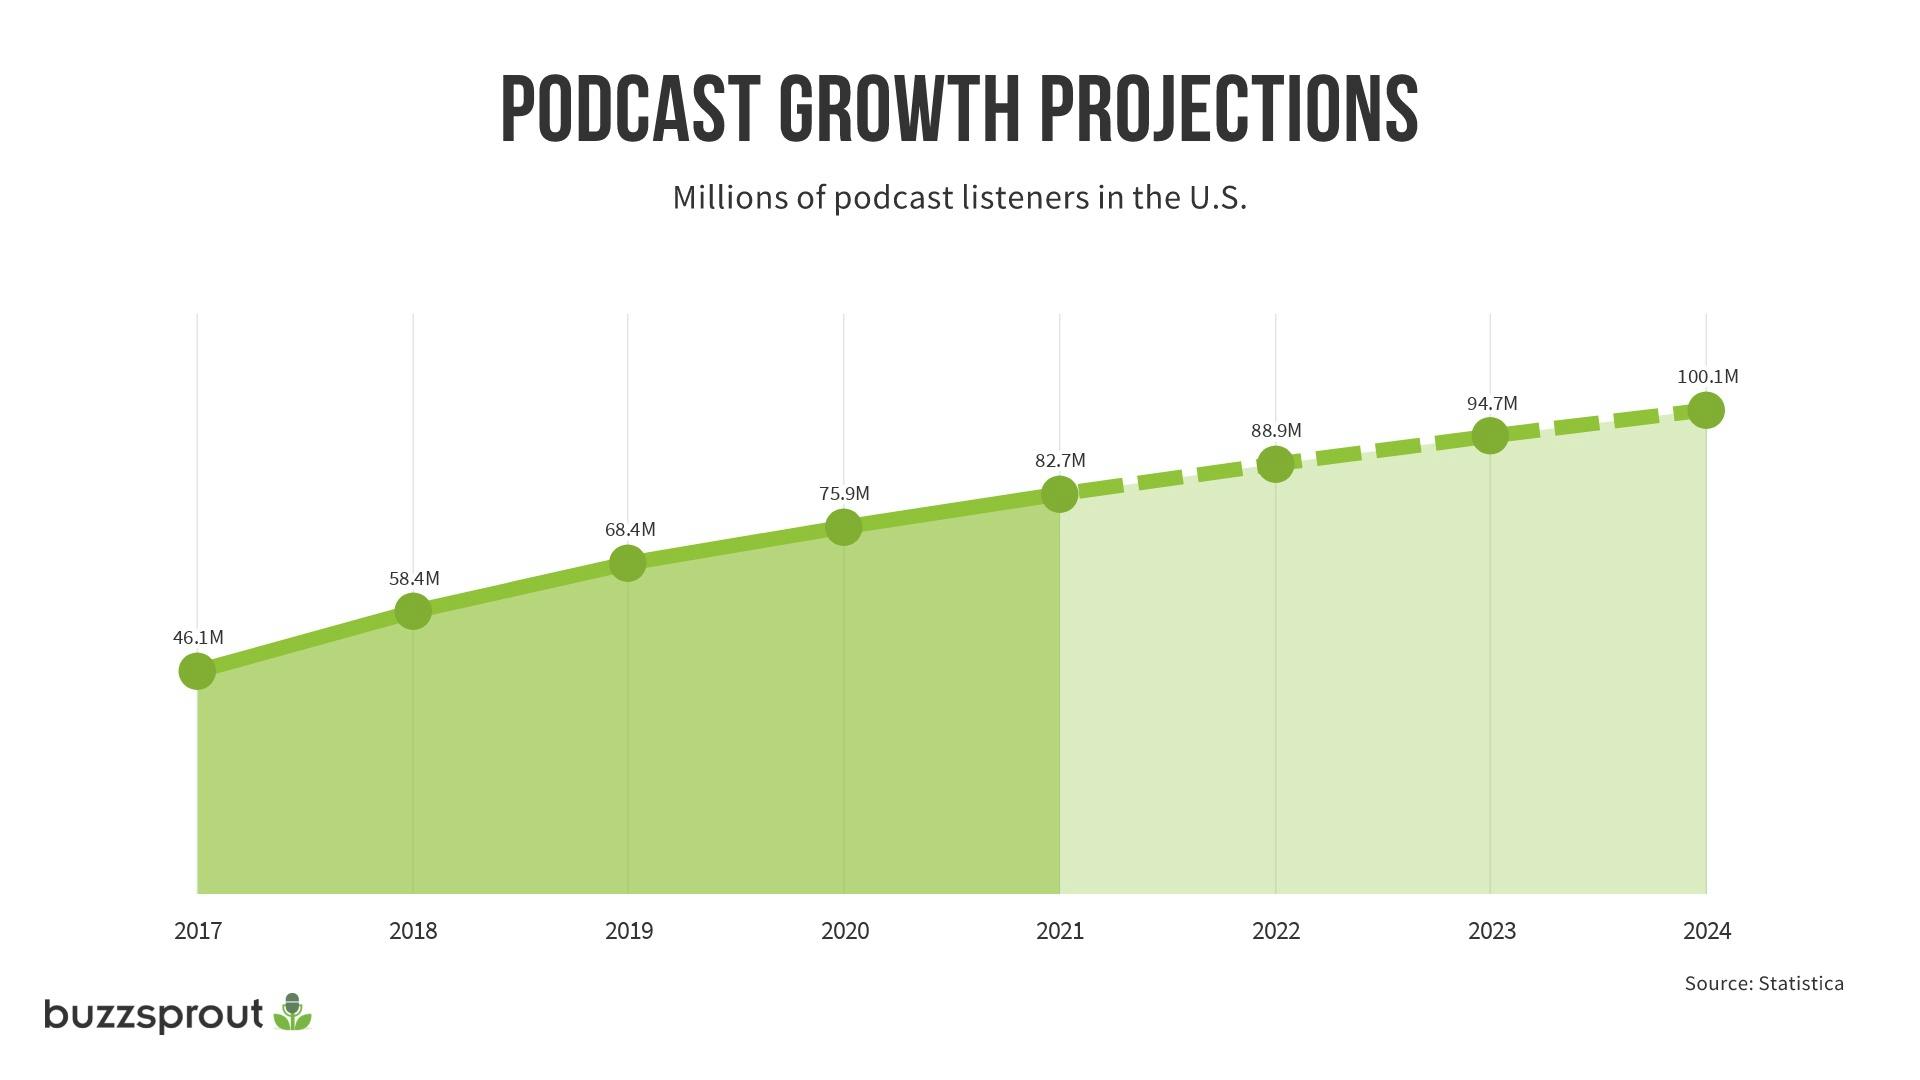 Podcast growth projections in the US